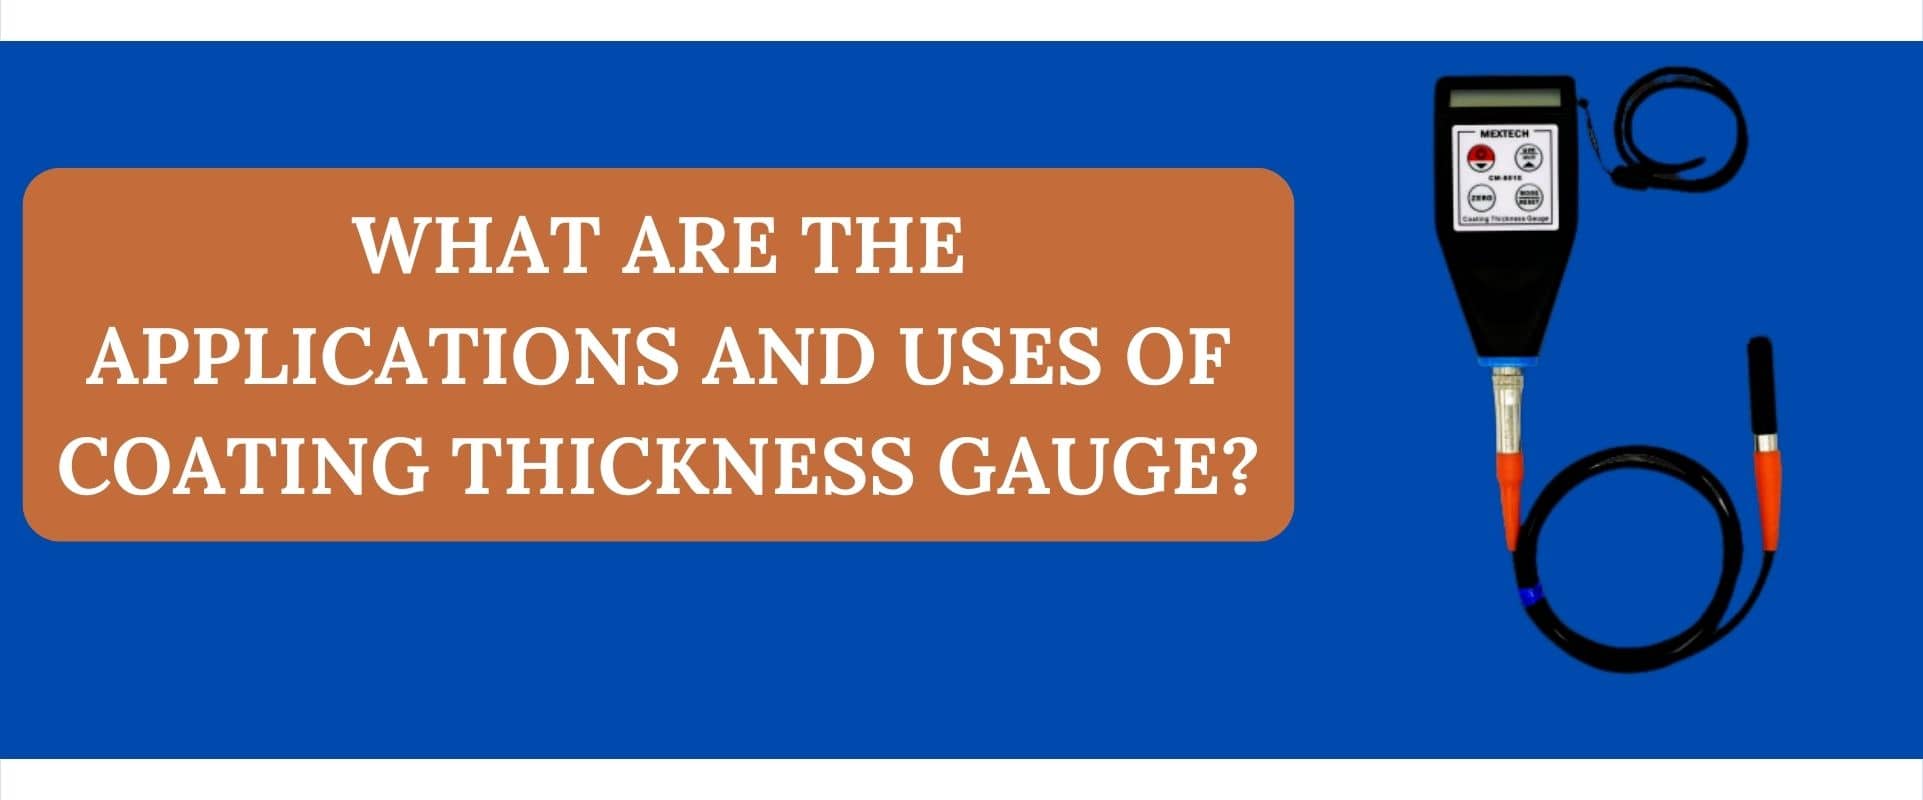 What are the Applications and Uses of Coating Thickness Gauge?